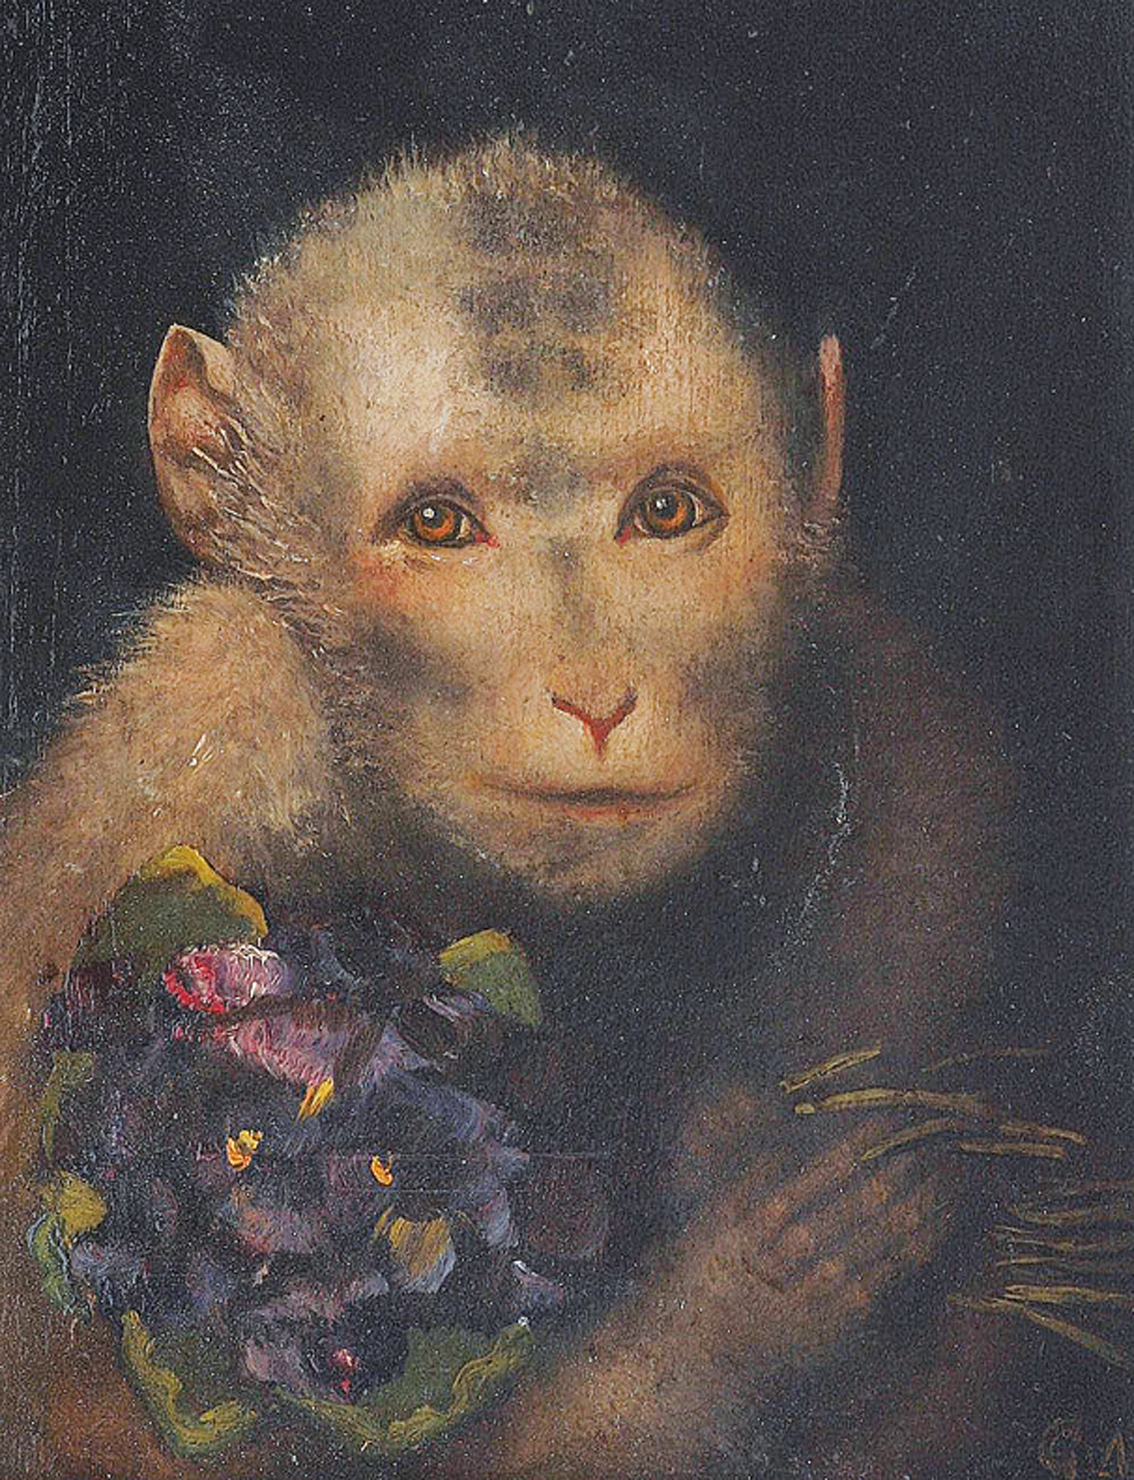 "A monkey with a nosegay of pansies"